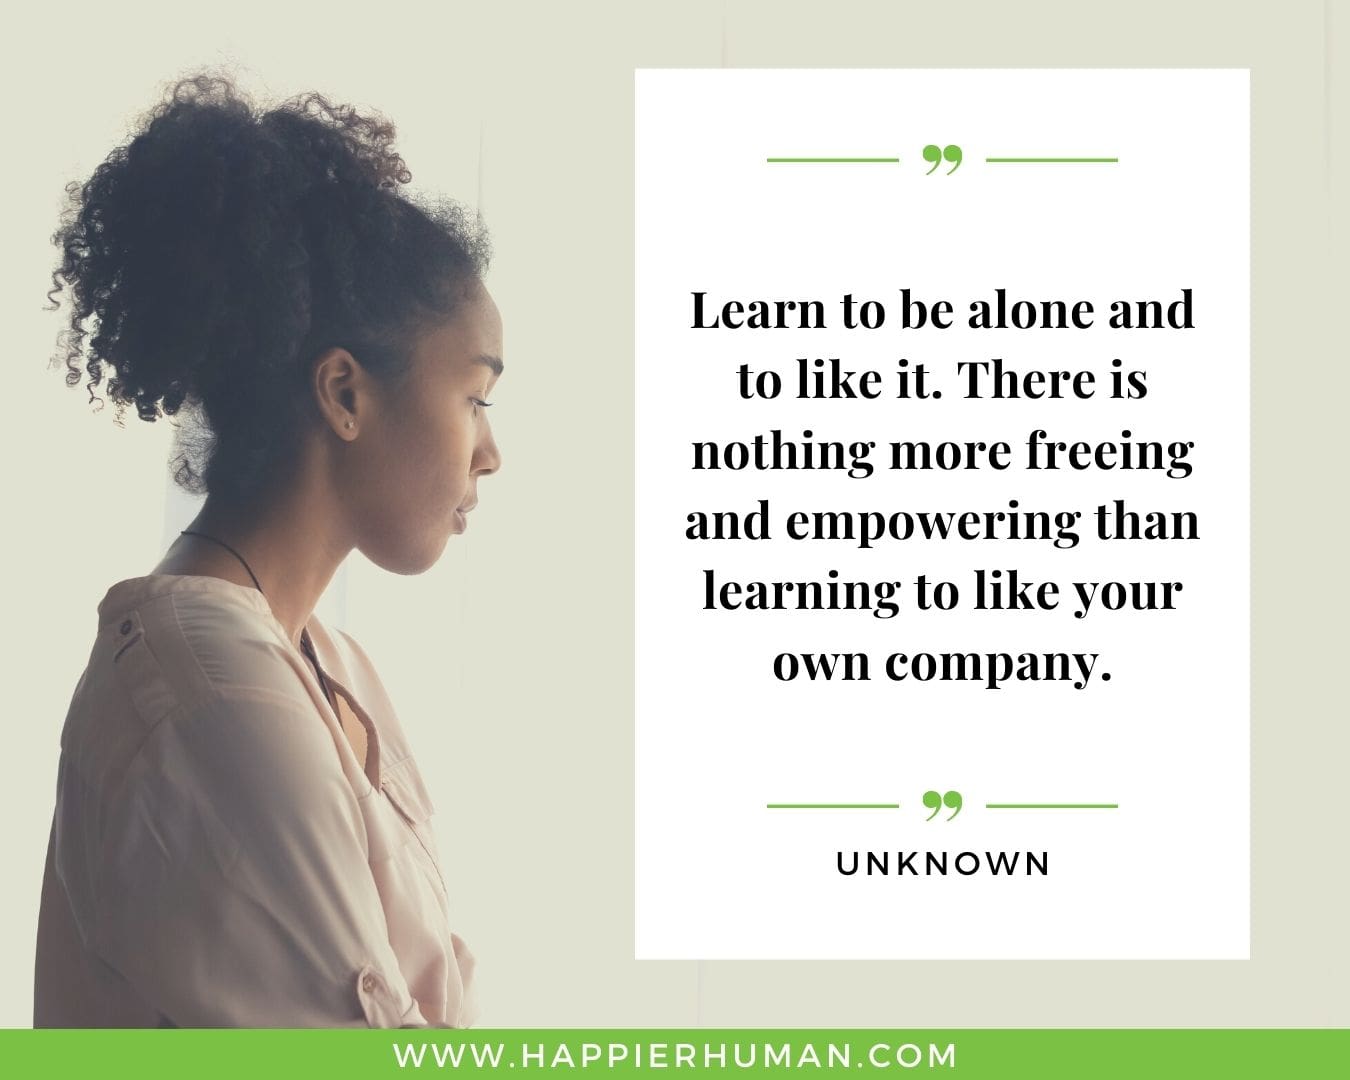 Loneliness Quotes - “Learn to be alone and to like it. There is nothing more freeing and empowering than learning to like your own company.” – Unknown